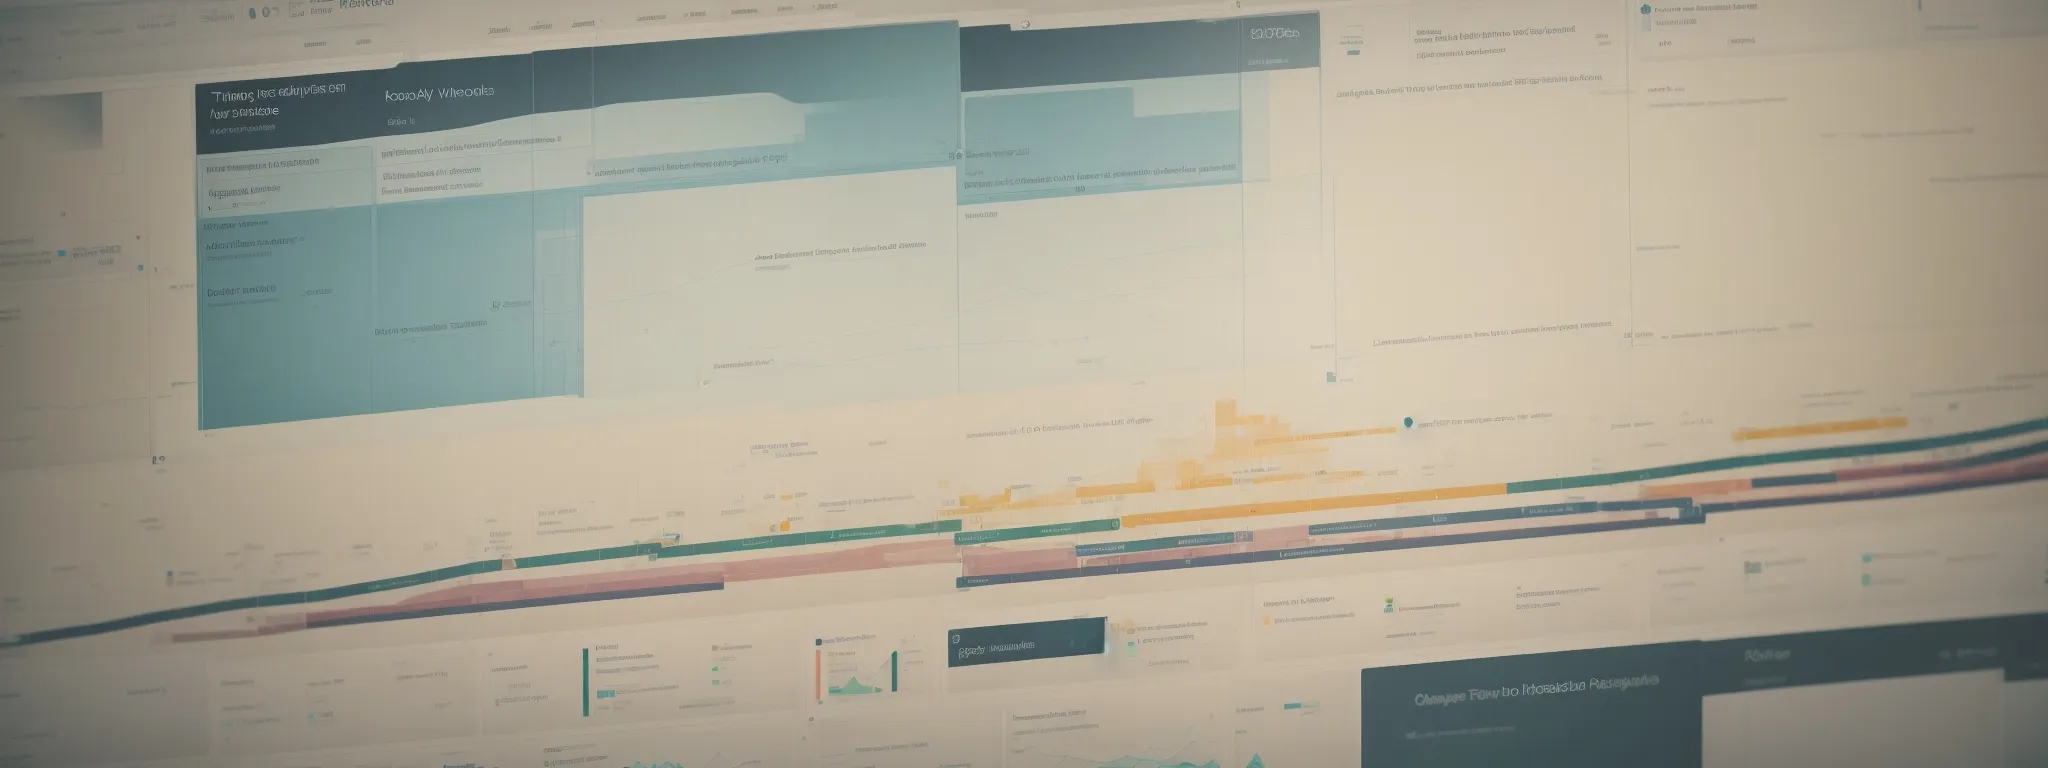 a timeline depicting the progress of keyword research tools from simple charts to complex interface dashboards displaying real-time seo analytics.